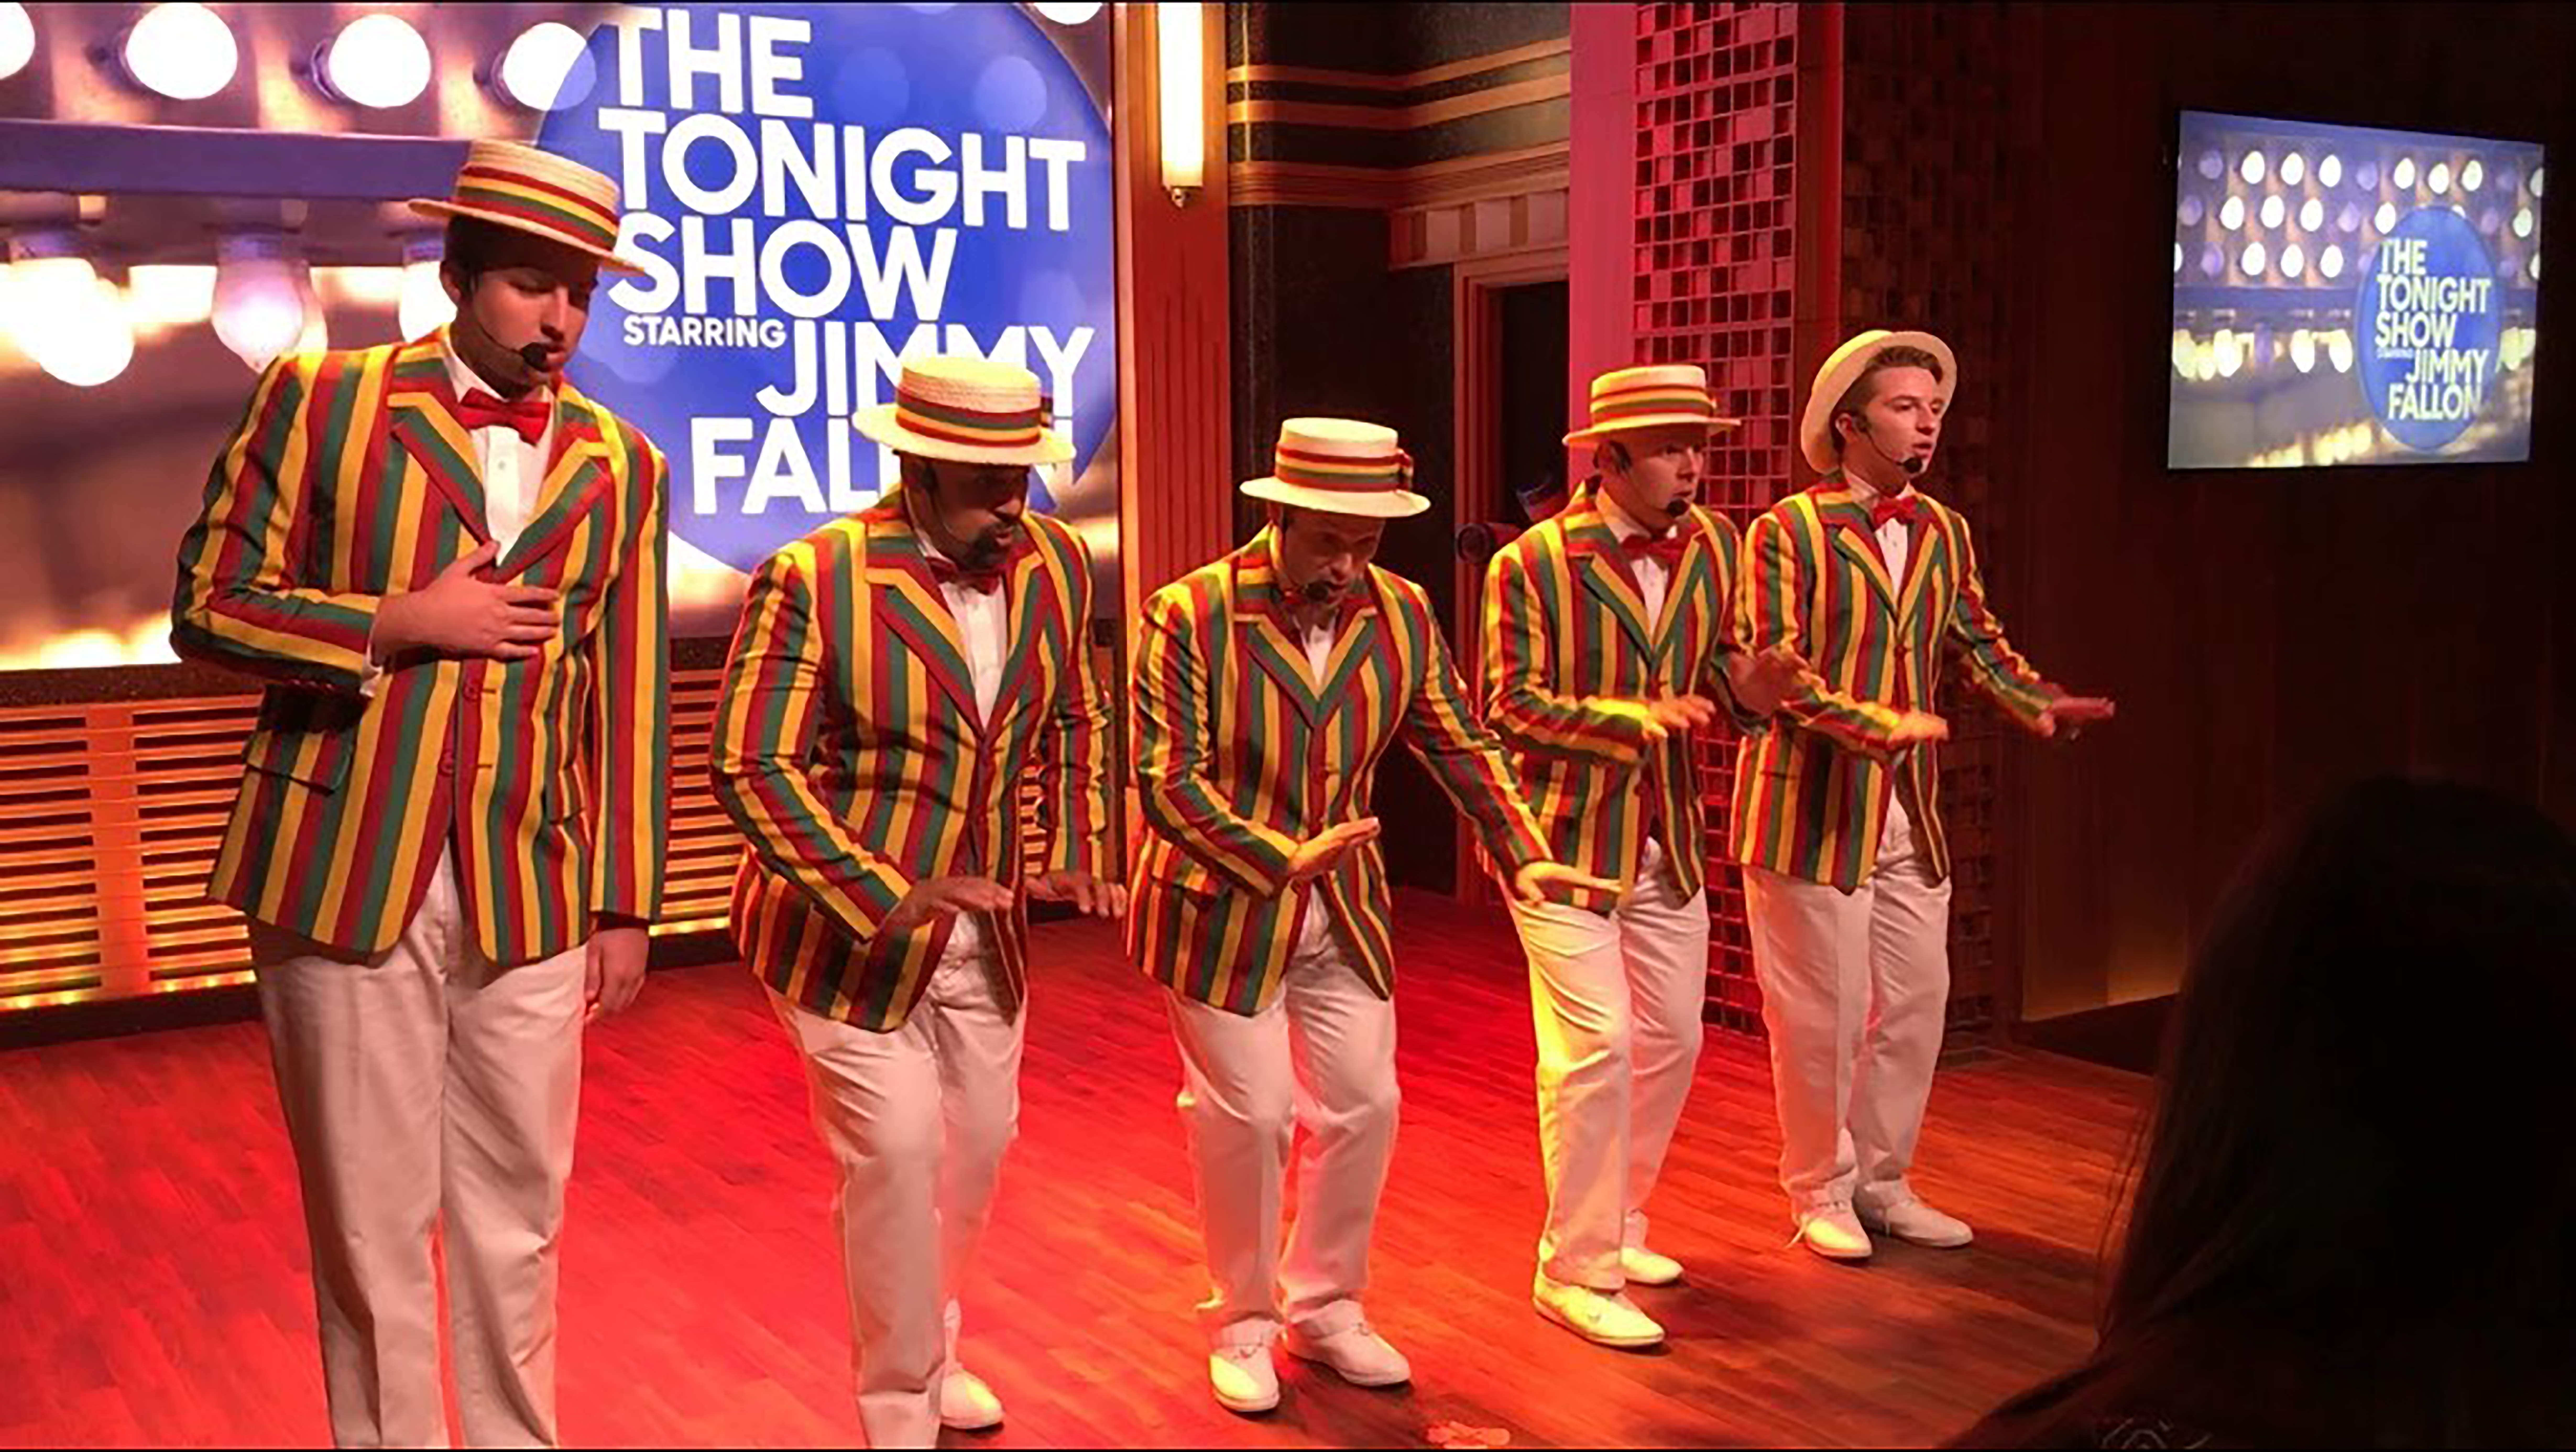 The Ragtime Gals singing on The Tonight Show